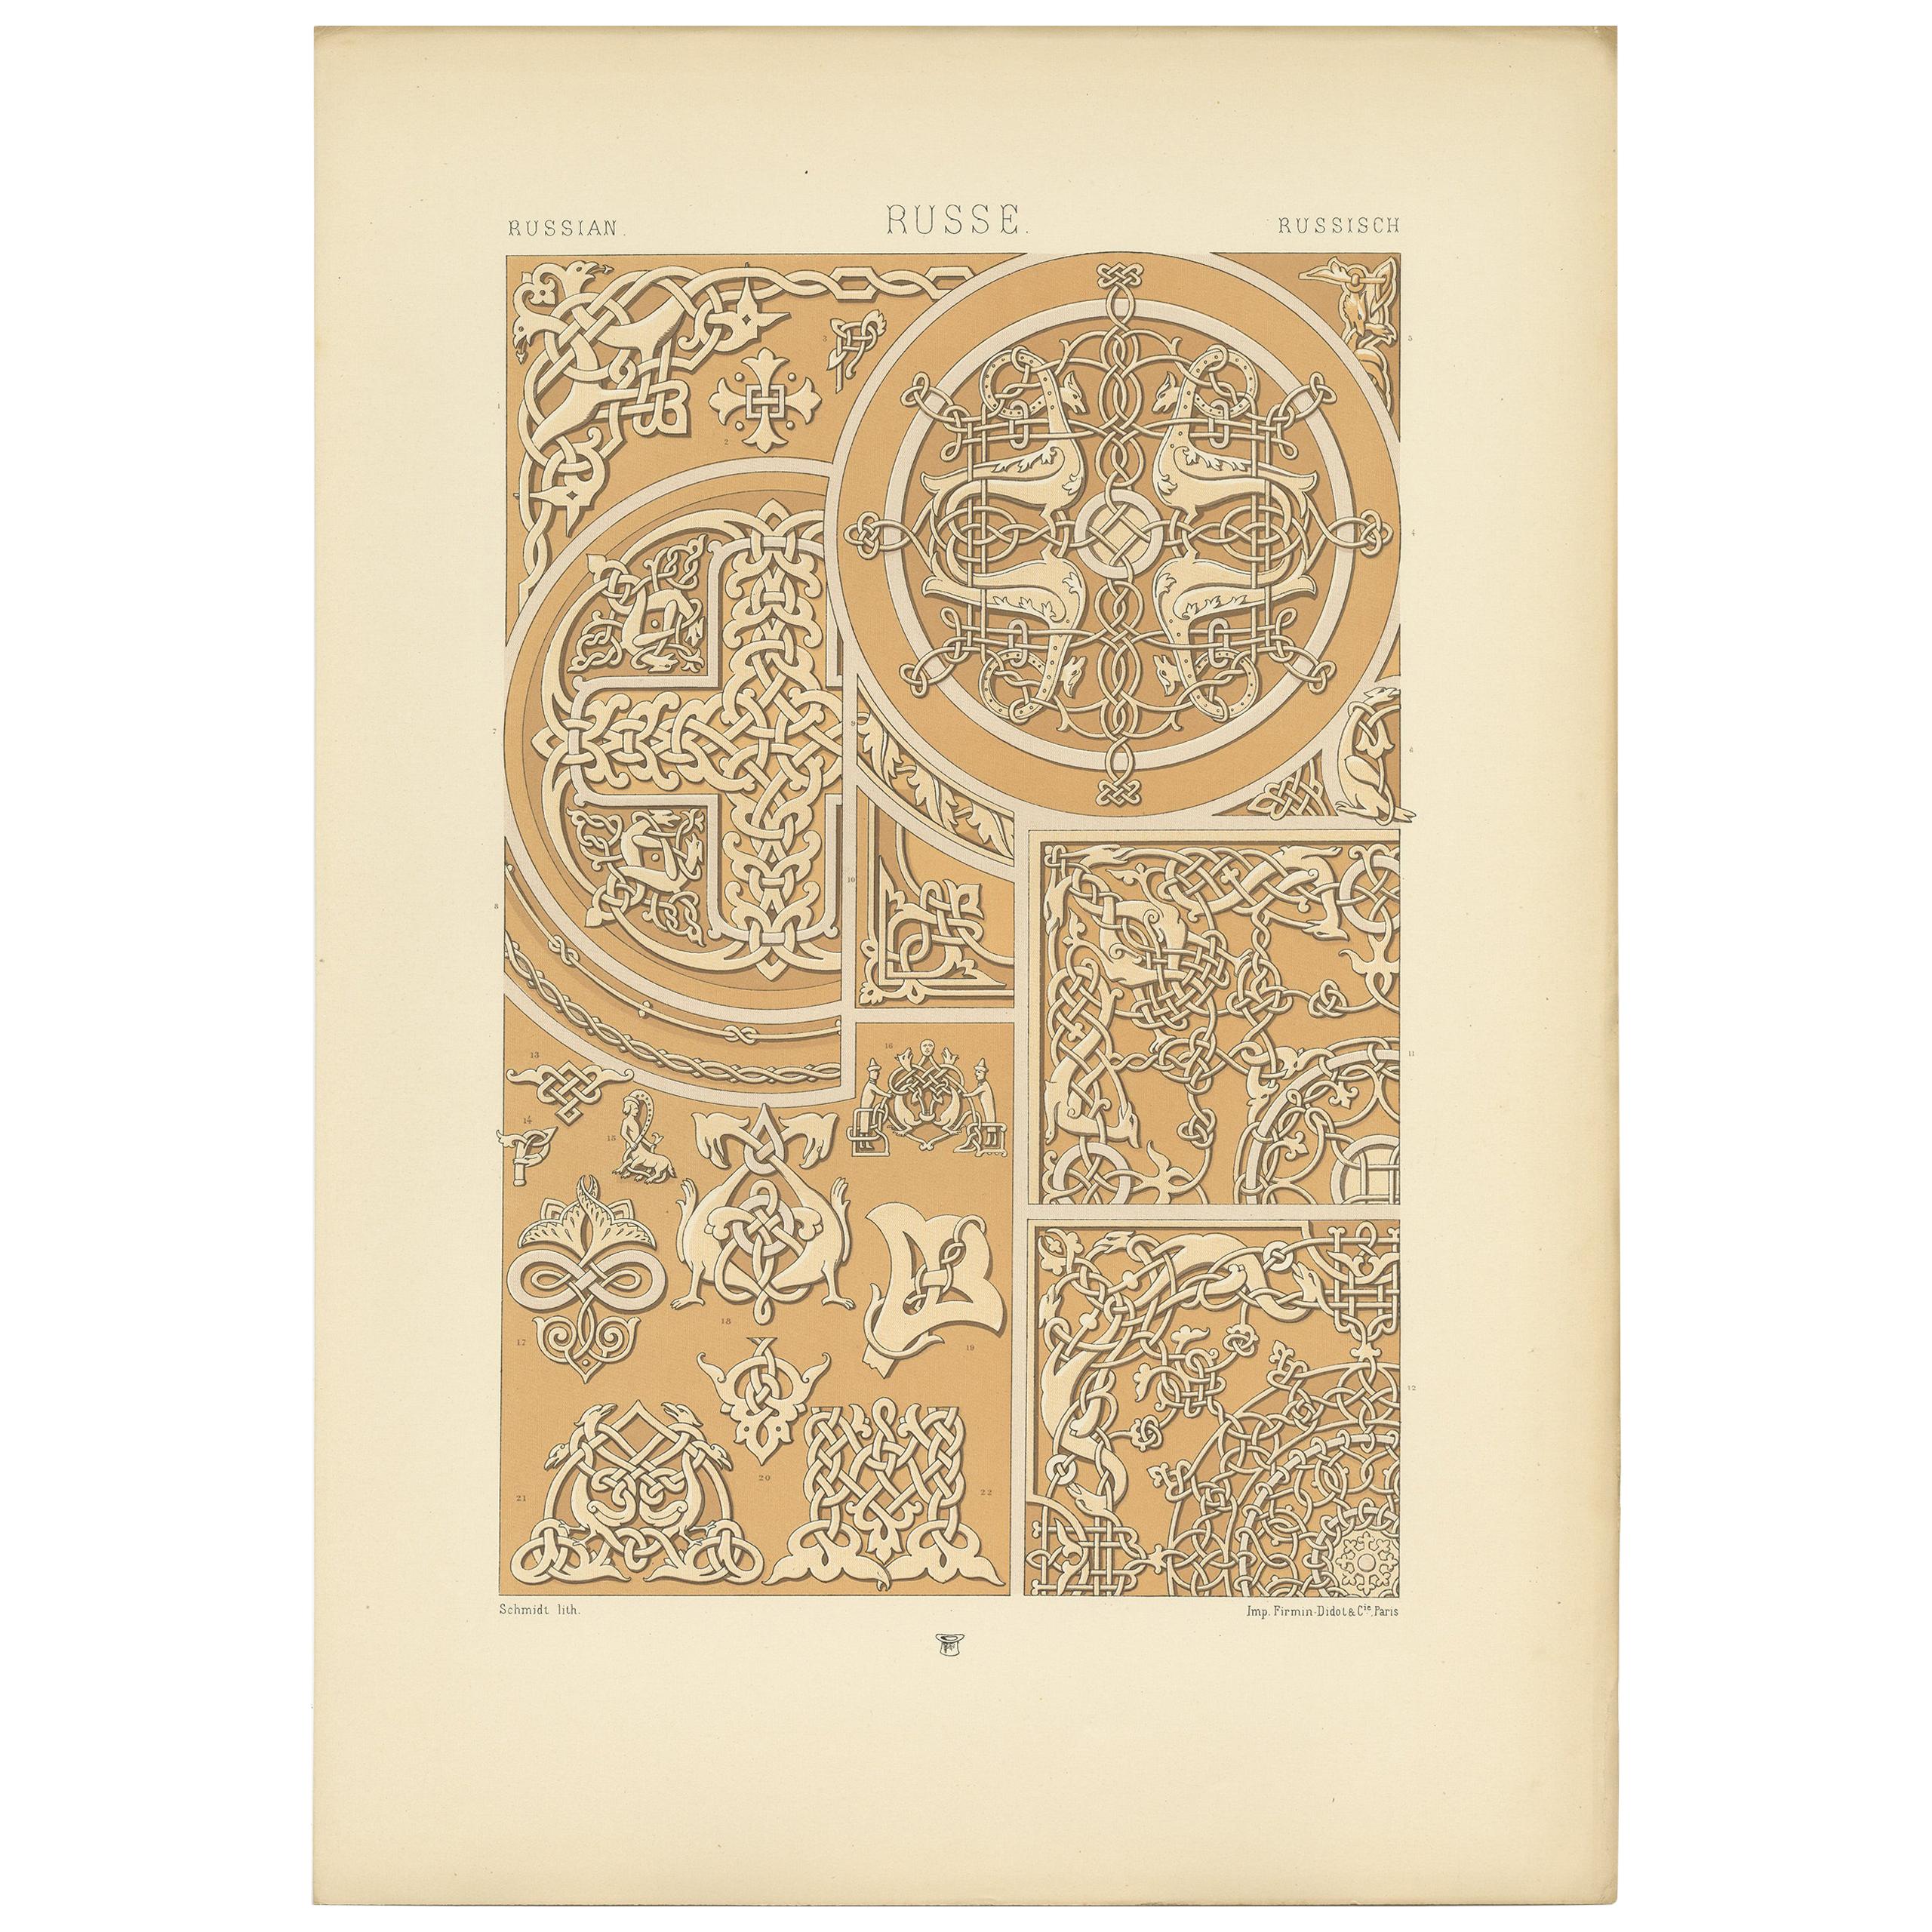 Pl. 66 Antique Print of Russian Motifs from Metalwork and Manuscripts by Racinet For Sale